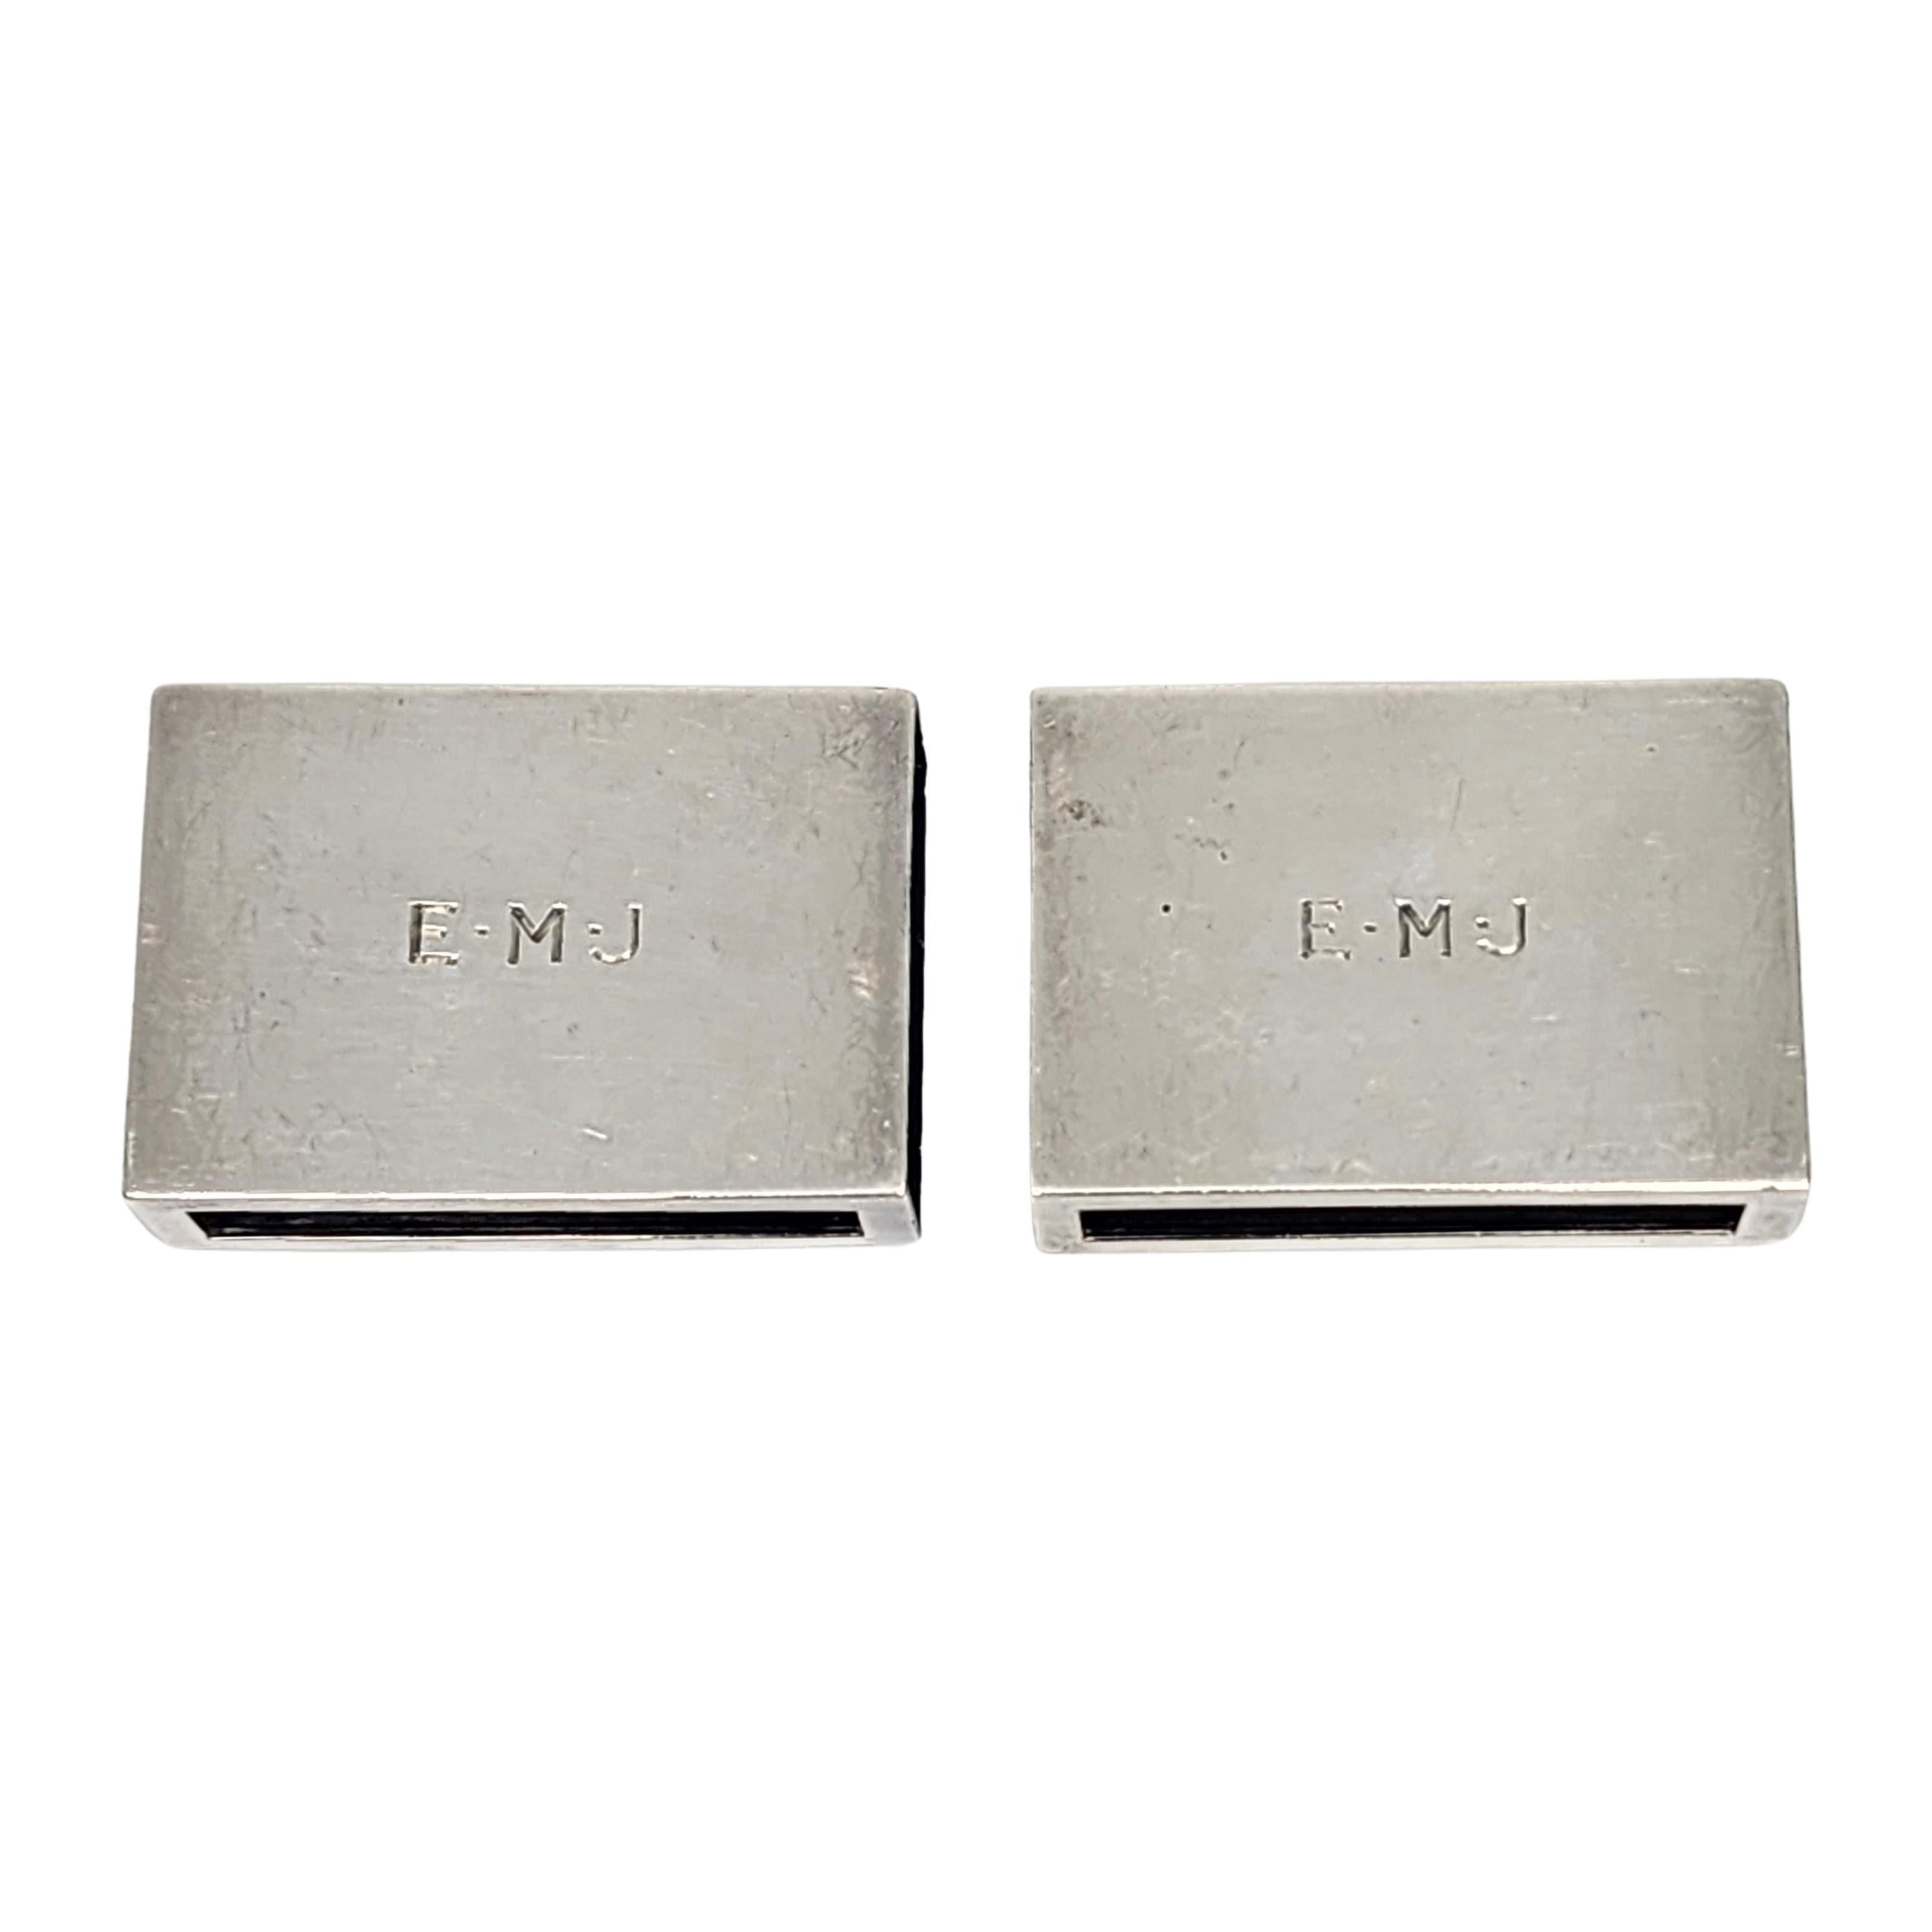 Set of 2 Tiffany & Co sterling silver matchbox covers with monogram, circa 1936.

Monogram appears to be EMJ

A simple and timeless design, with a smooth polished finish. The M hallmark on the ashtrays date this piece to manufacture under the